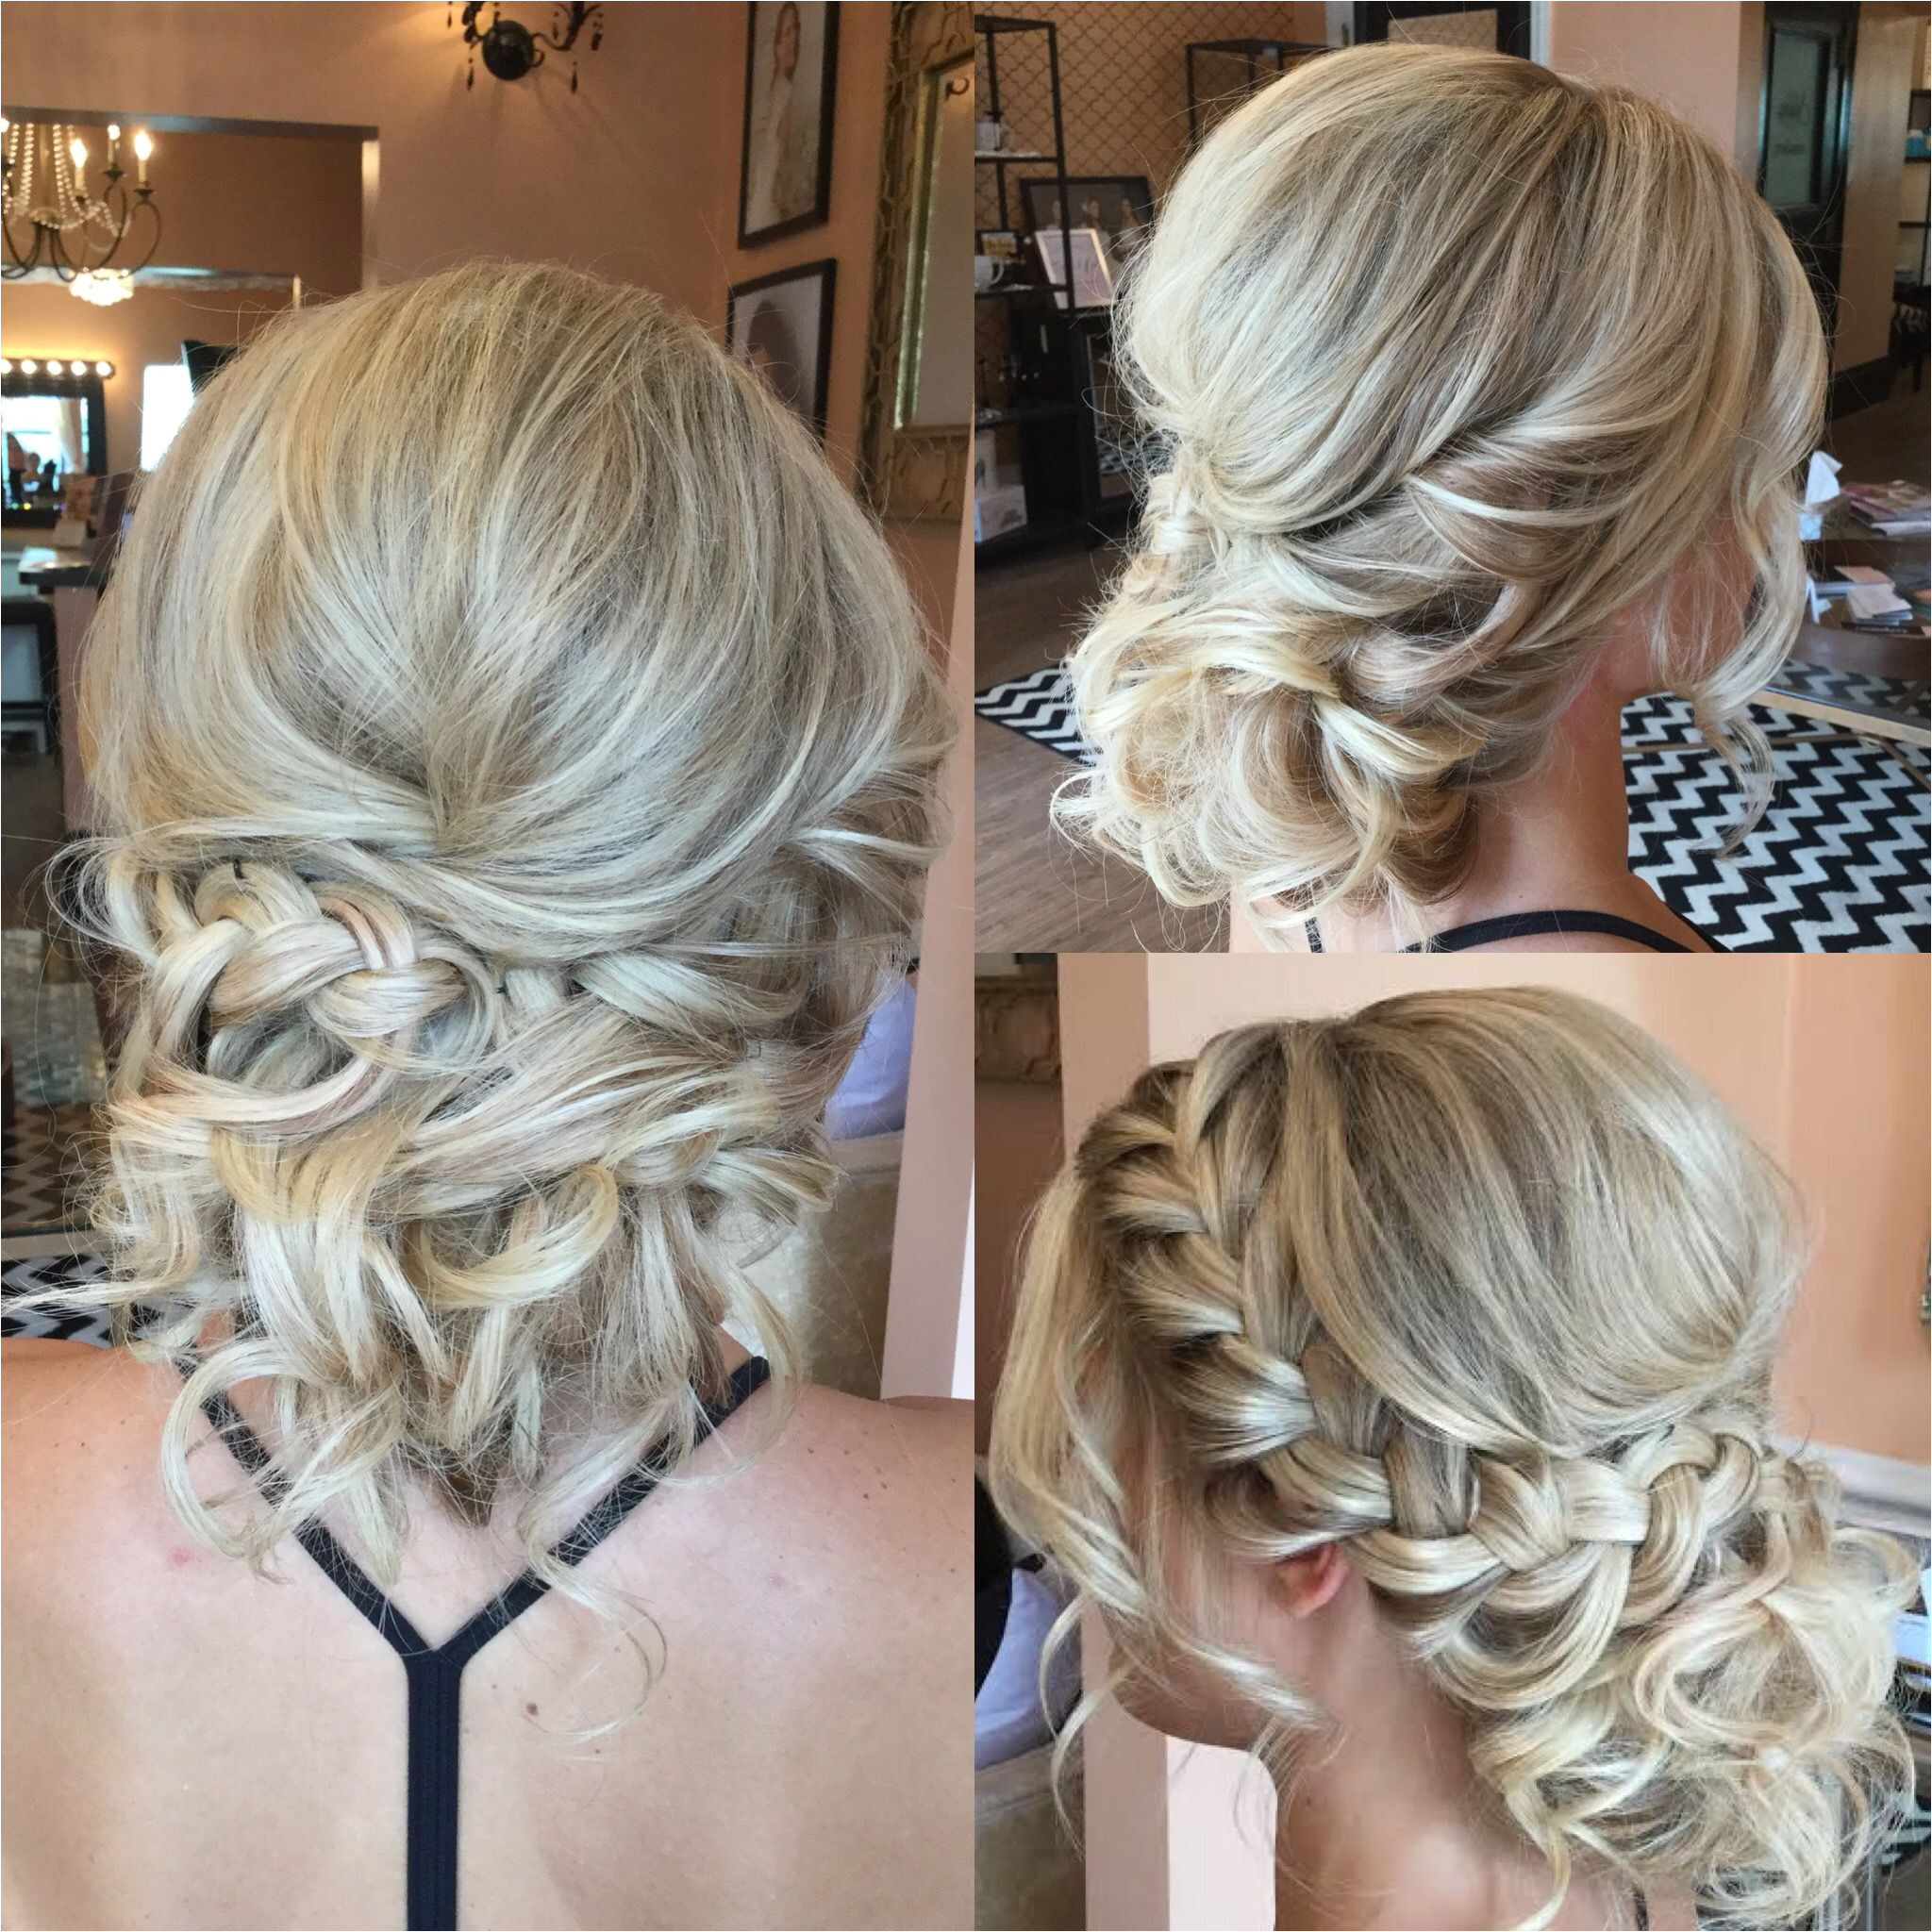 Prom Hairstyles Side Curls with Braid Textured Up Do for Blondes with Curls and Side Braid Bridal